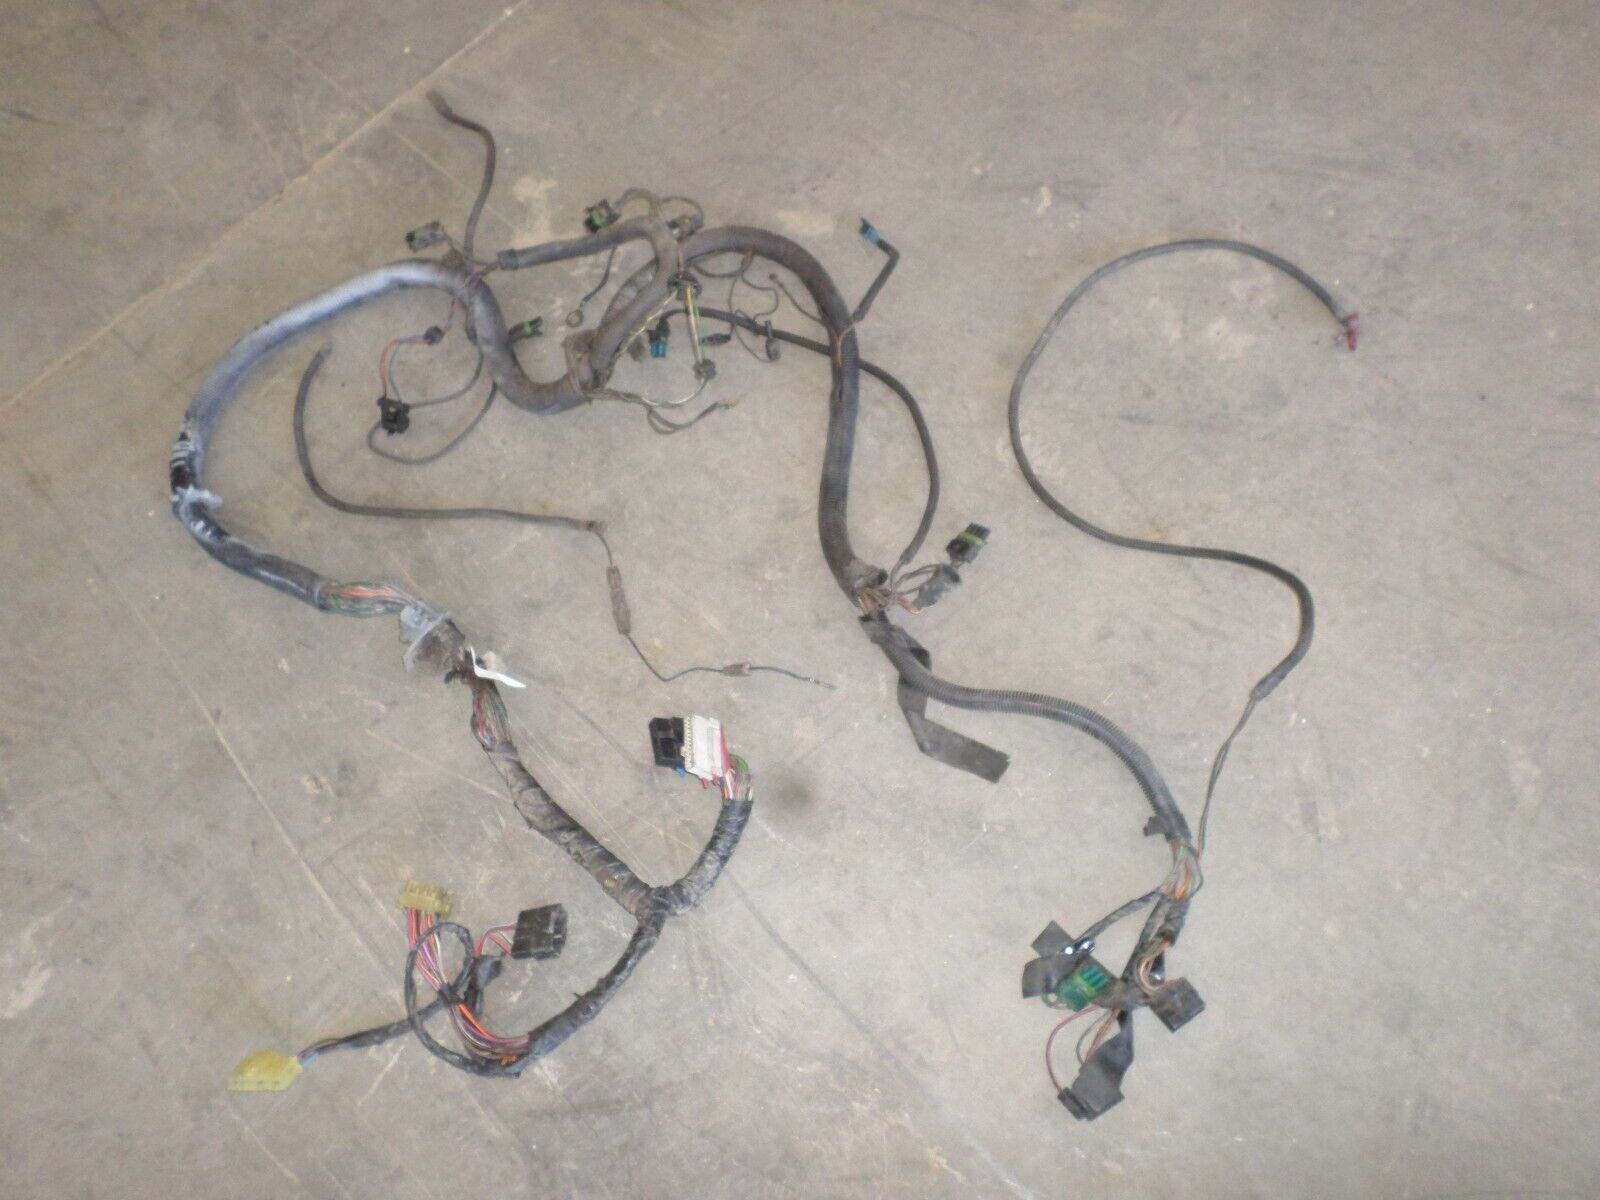 82 Camaro CROSSFIRE INJECTION ENGINE WIRING HARNESS Indy Pace Car 305 #2